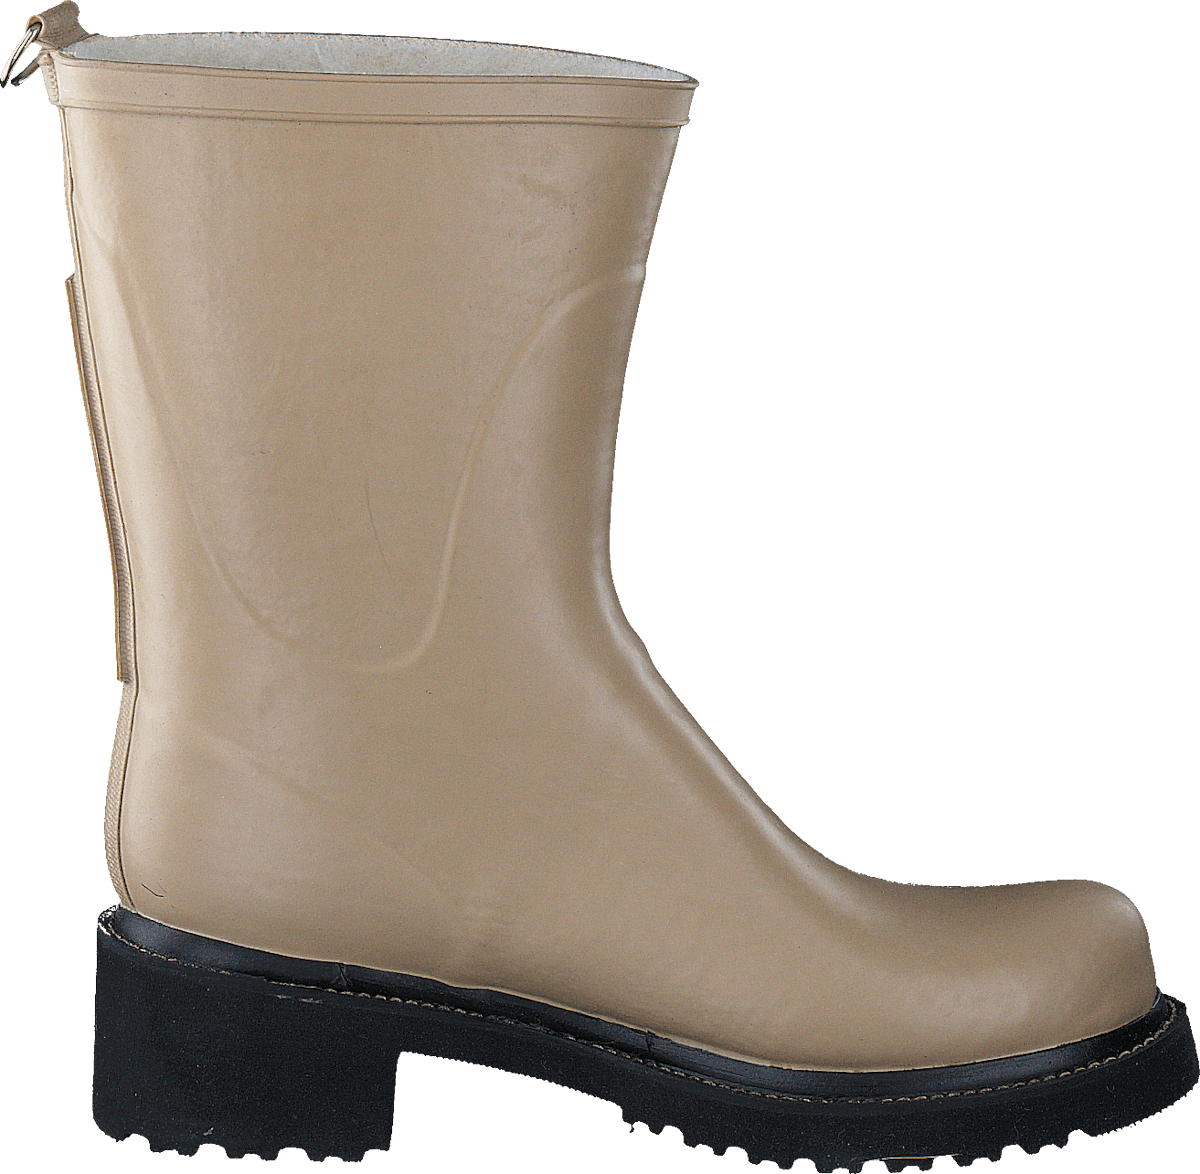 3/4 Rubberboot R36 Camel